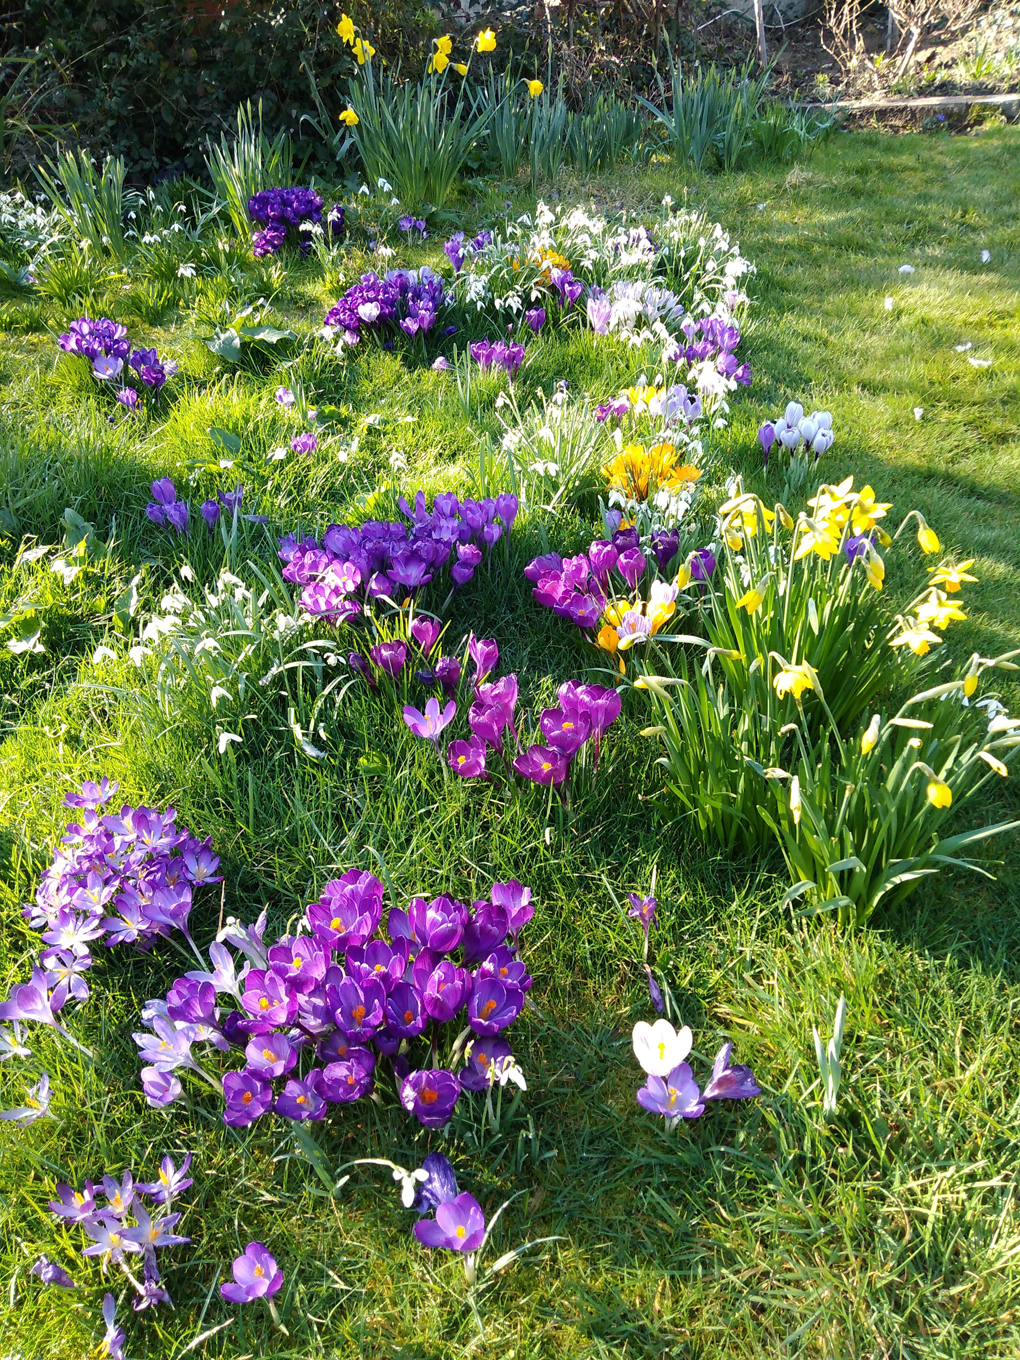 A mass of purple and yellow crocuses, daffodils and snowdrops on a sunny springtime day